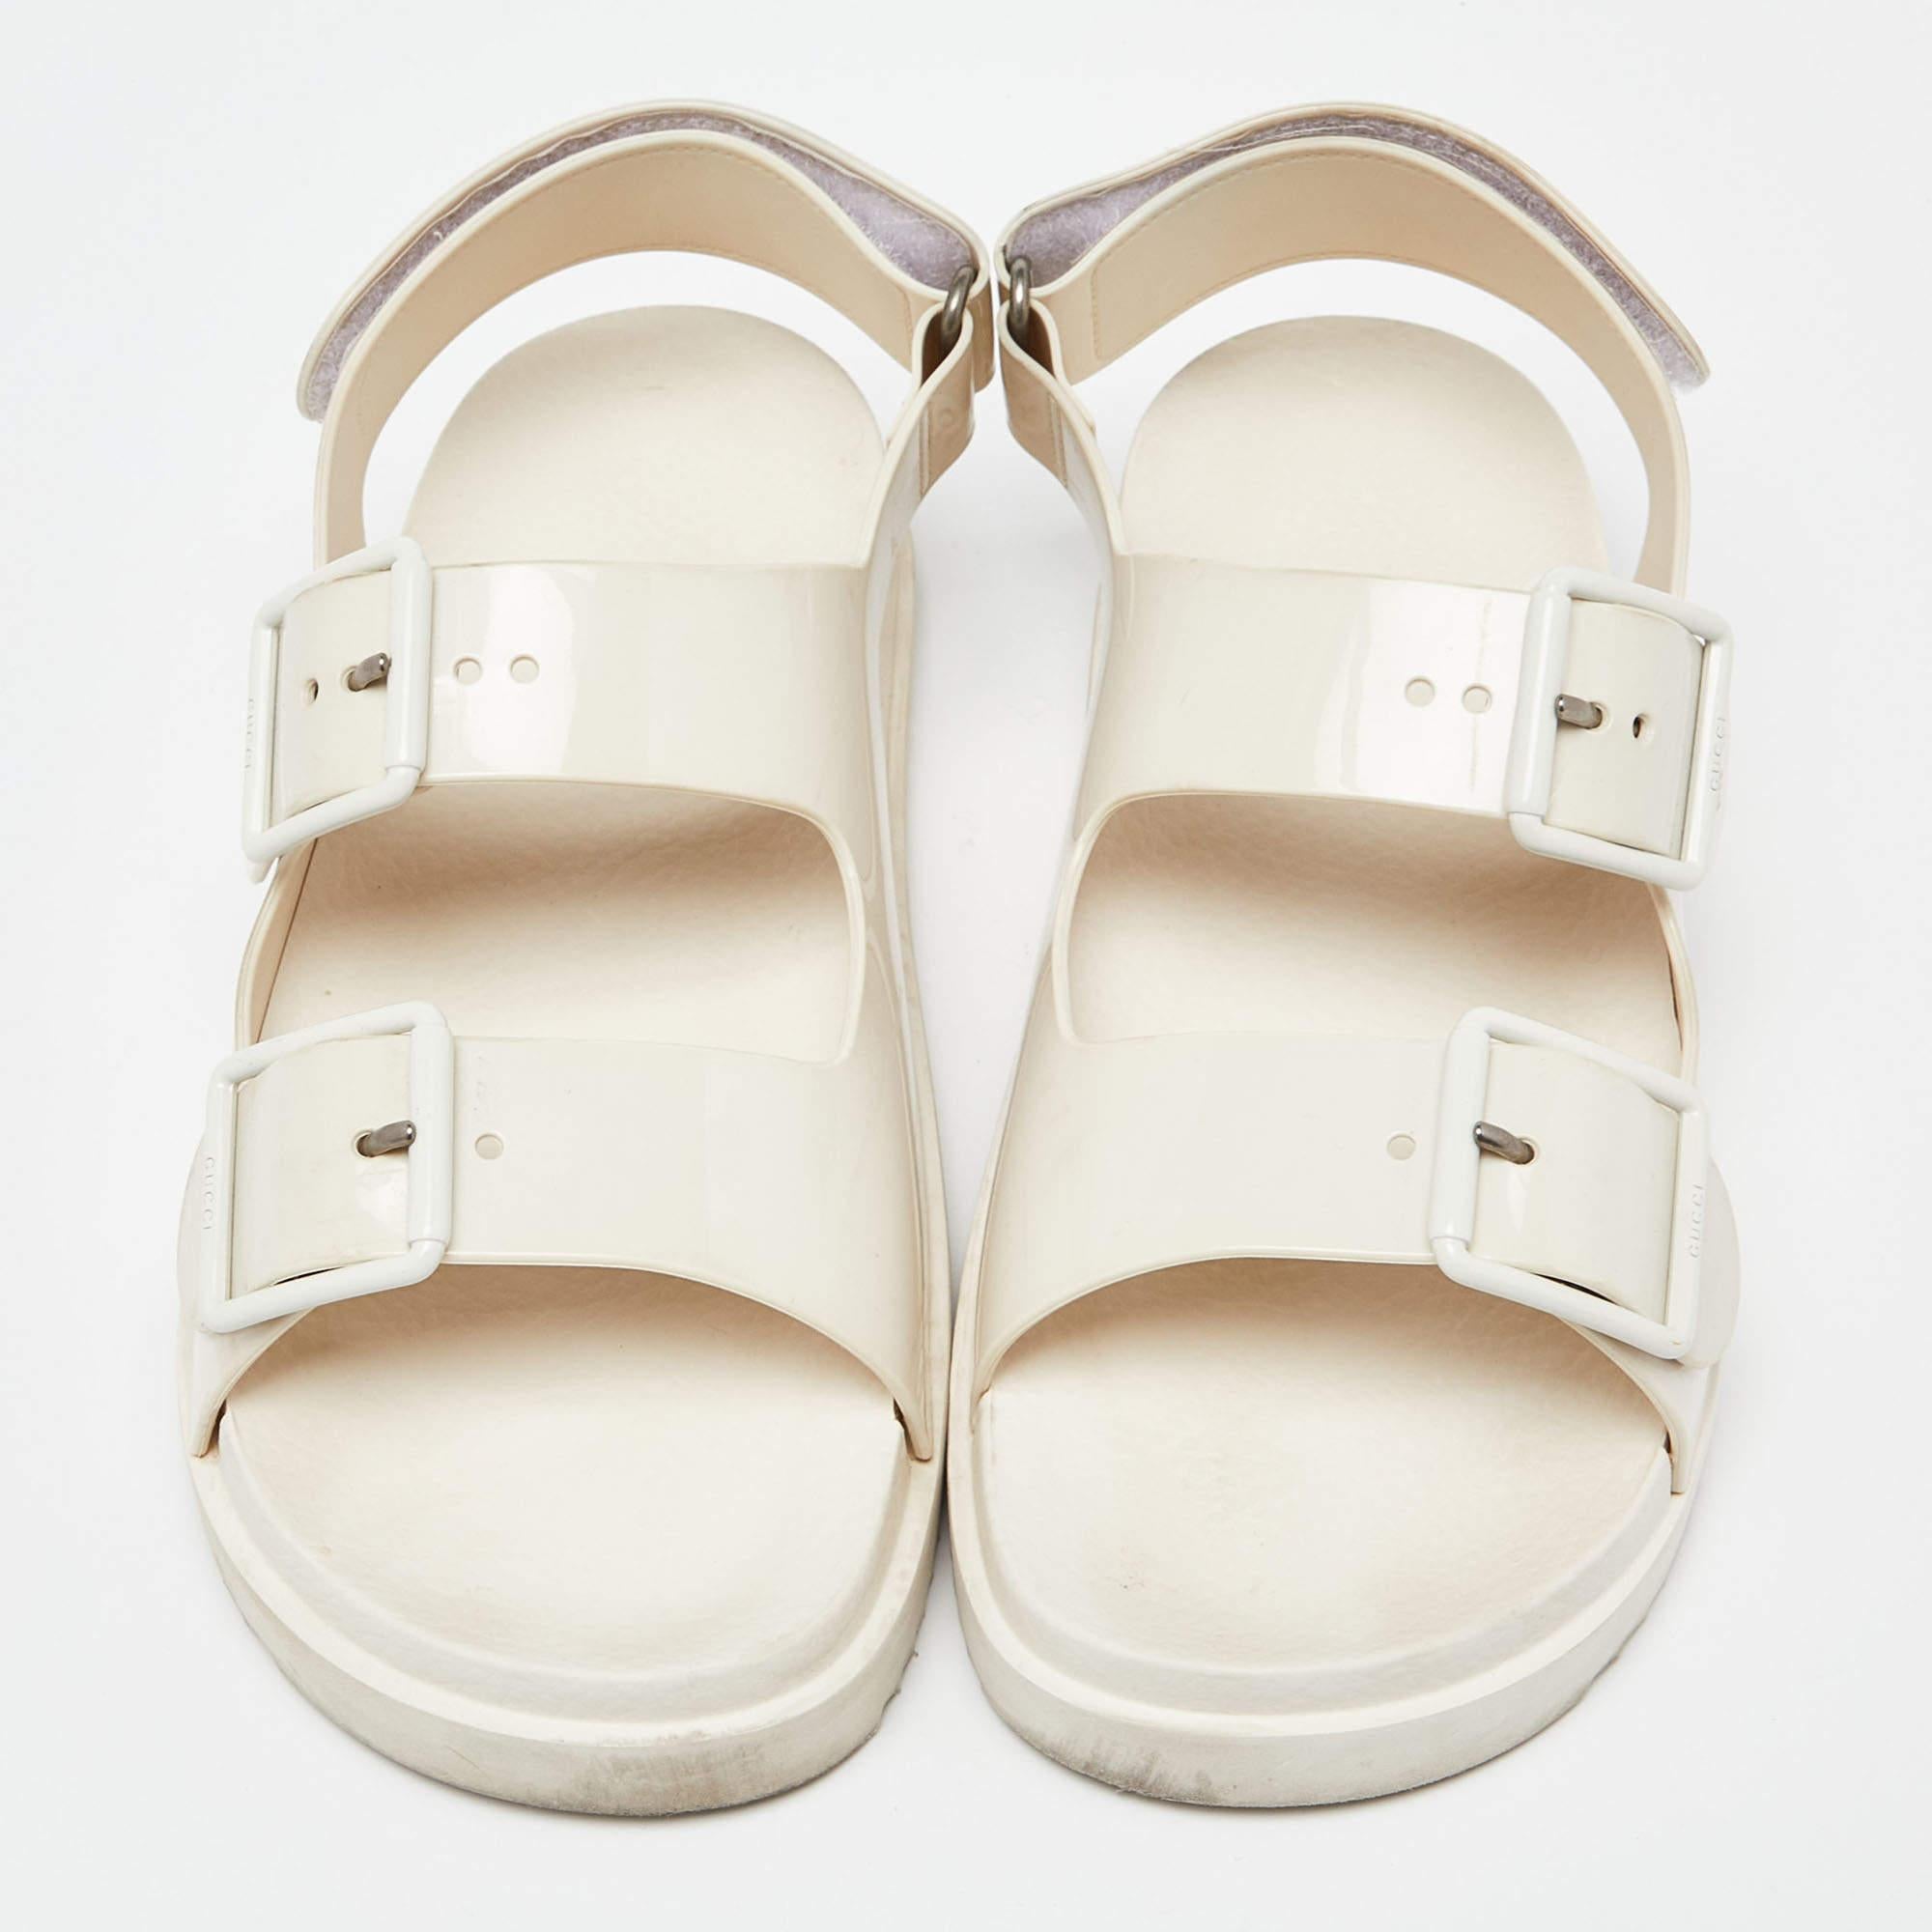 Be at your casual best while still holding up the level of your style with these Gucci rubber sandals. The shoes come in white and feature upper buckled straps, a back velcro strap closure, and the Double G logo for a luxe finish.

